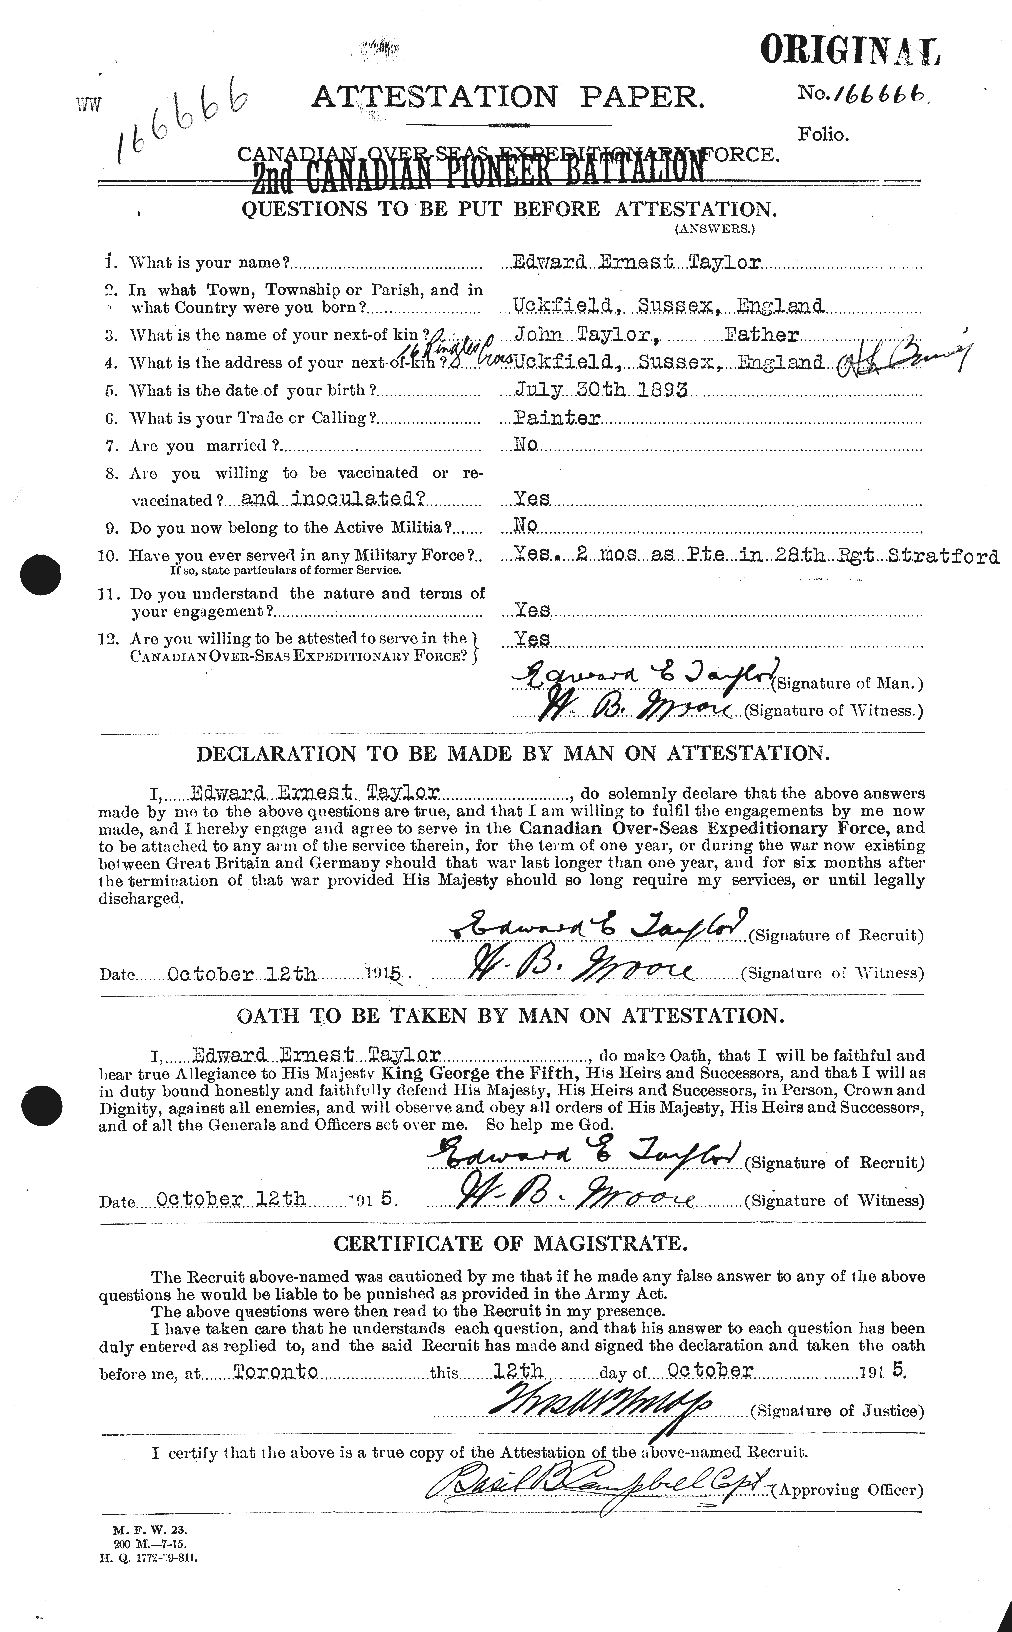 Personnel Records of the First World War - CEF 627308a